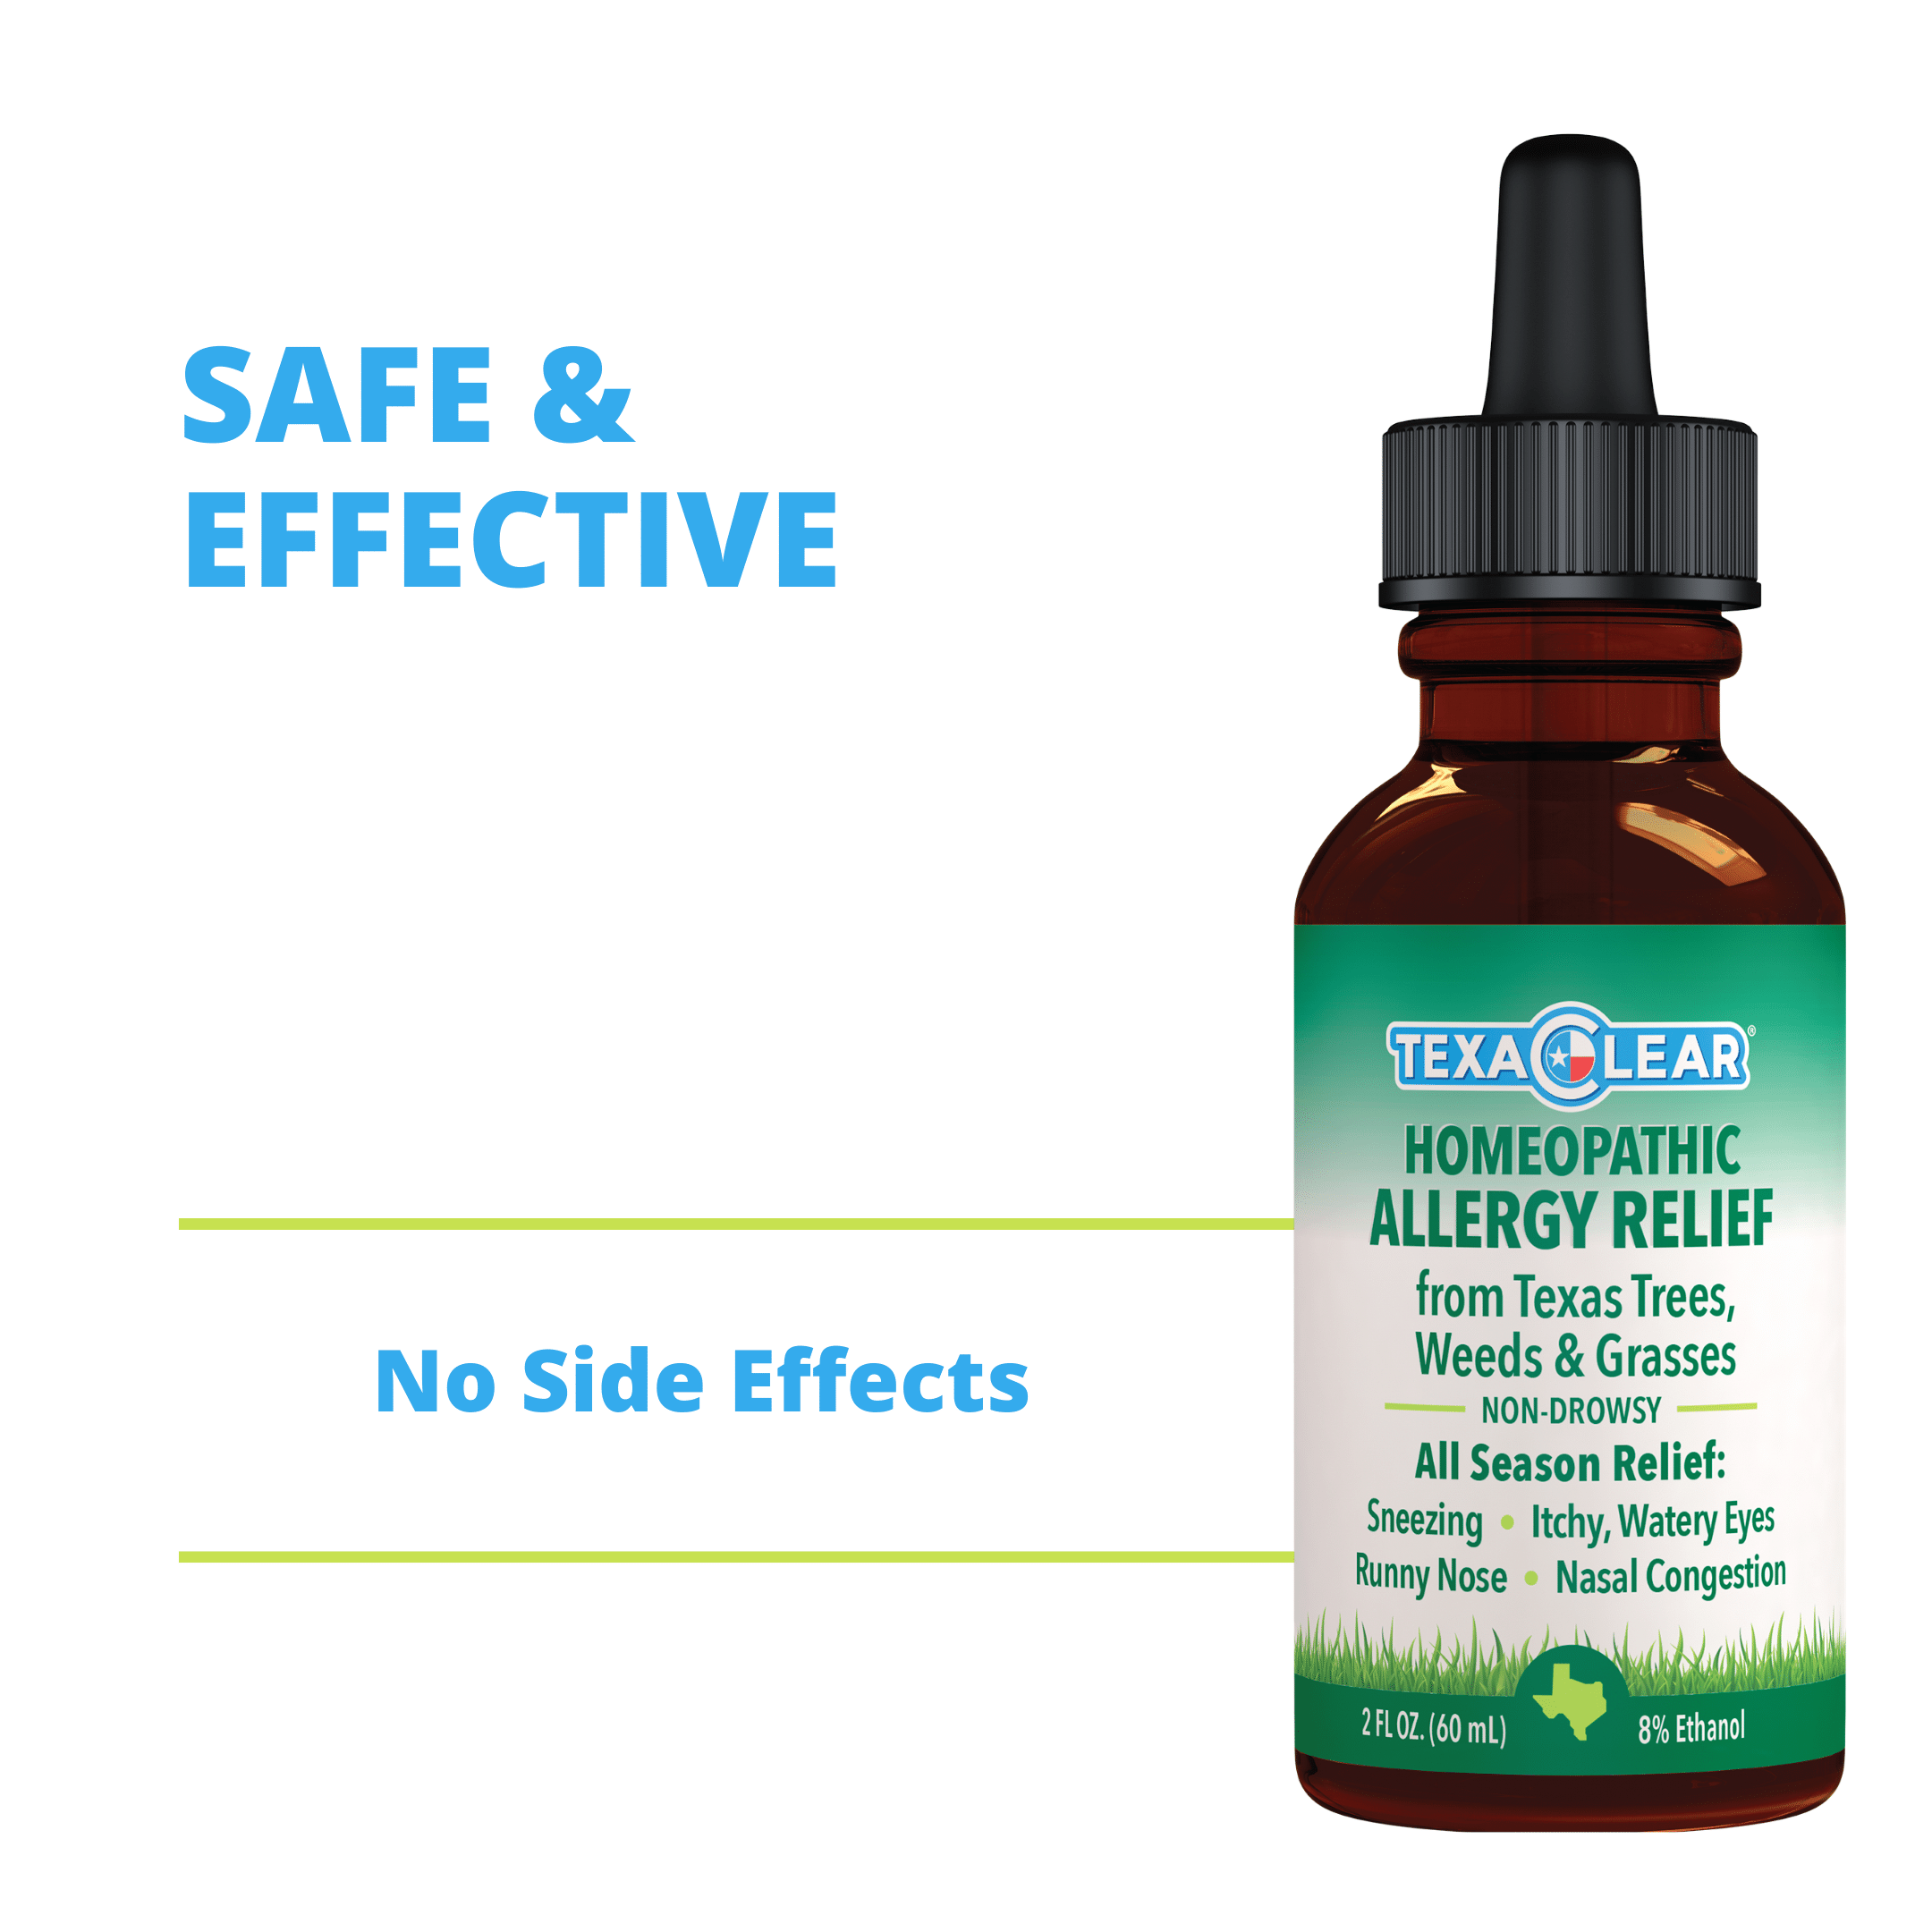 TexaClear Homeopathic Allergy Relief Drops are a safe and effective solution for Texas allergy relief with no side effects.